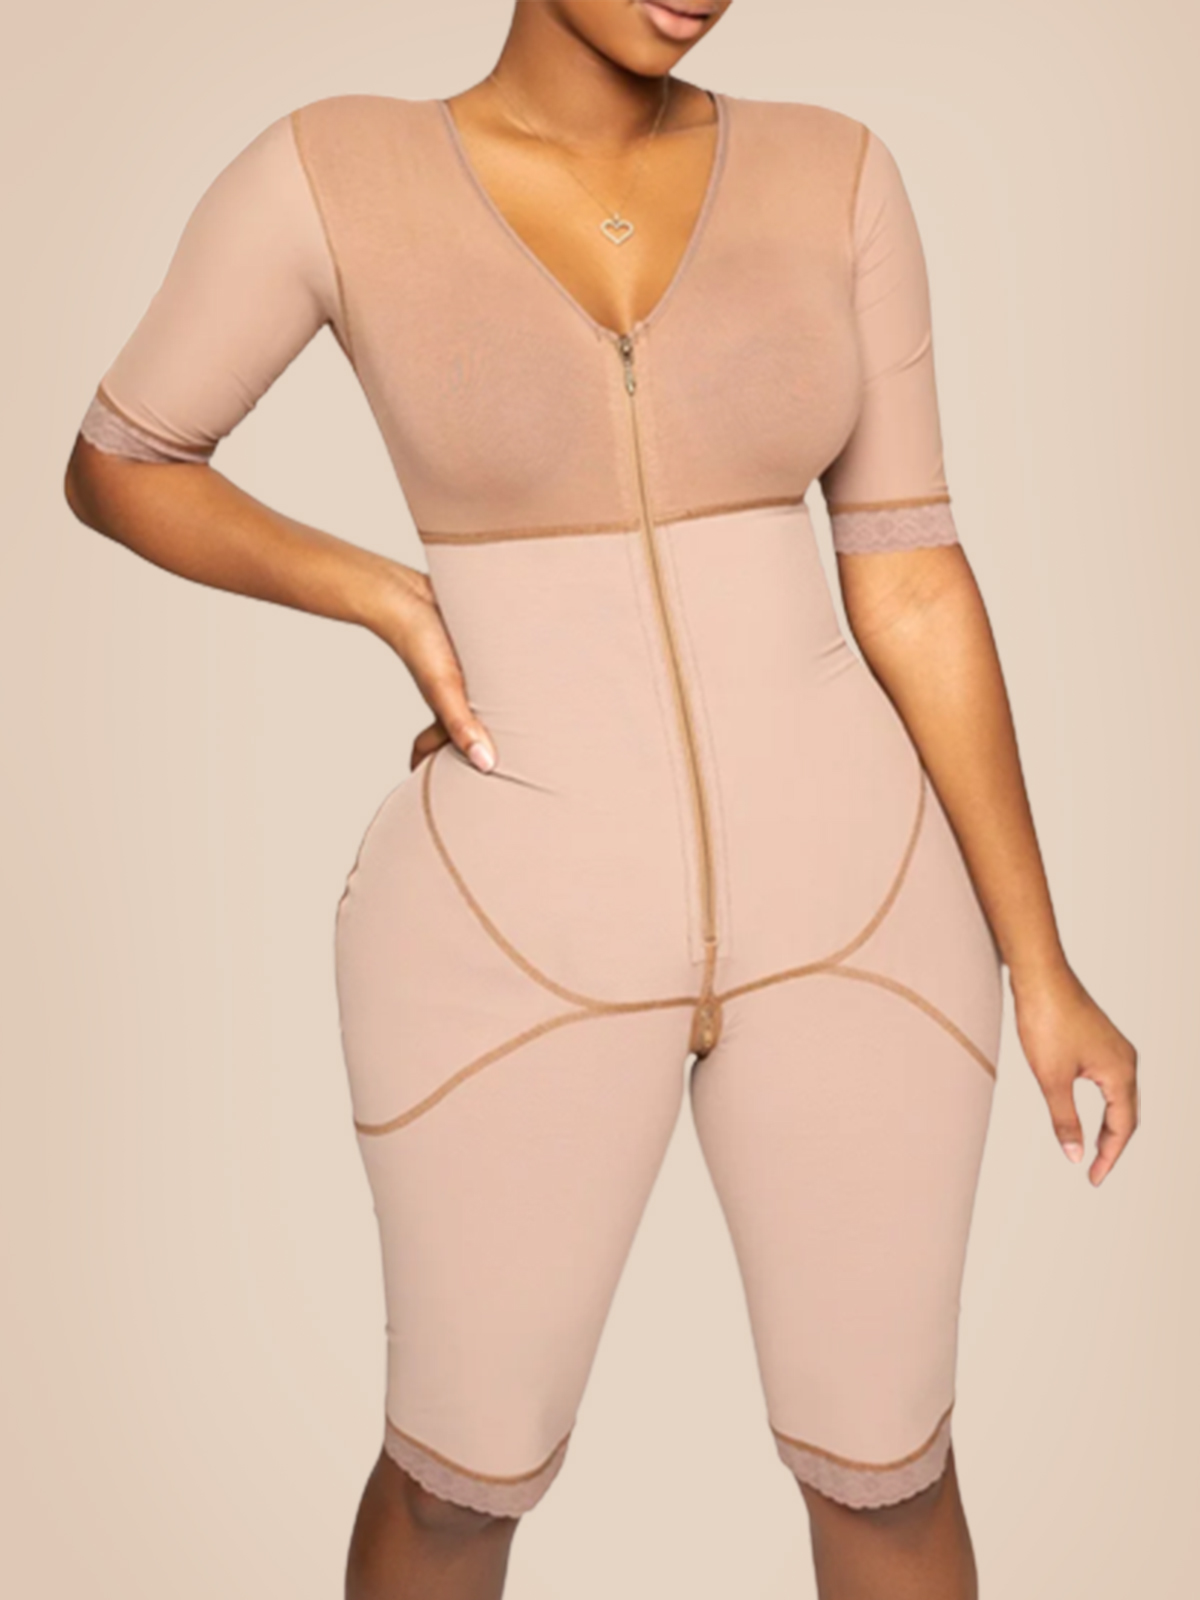 Full Body Bipper Bodysuit With Sleeves One-piece Postpartum Shapewear For Women Chest Cupport Hip Shaping Tummy Control Bodysuit